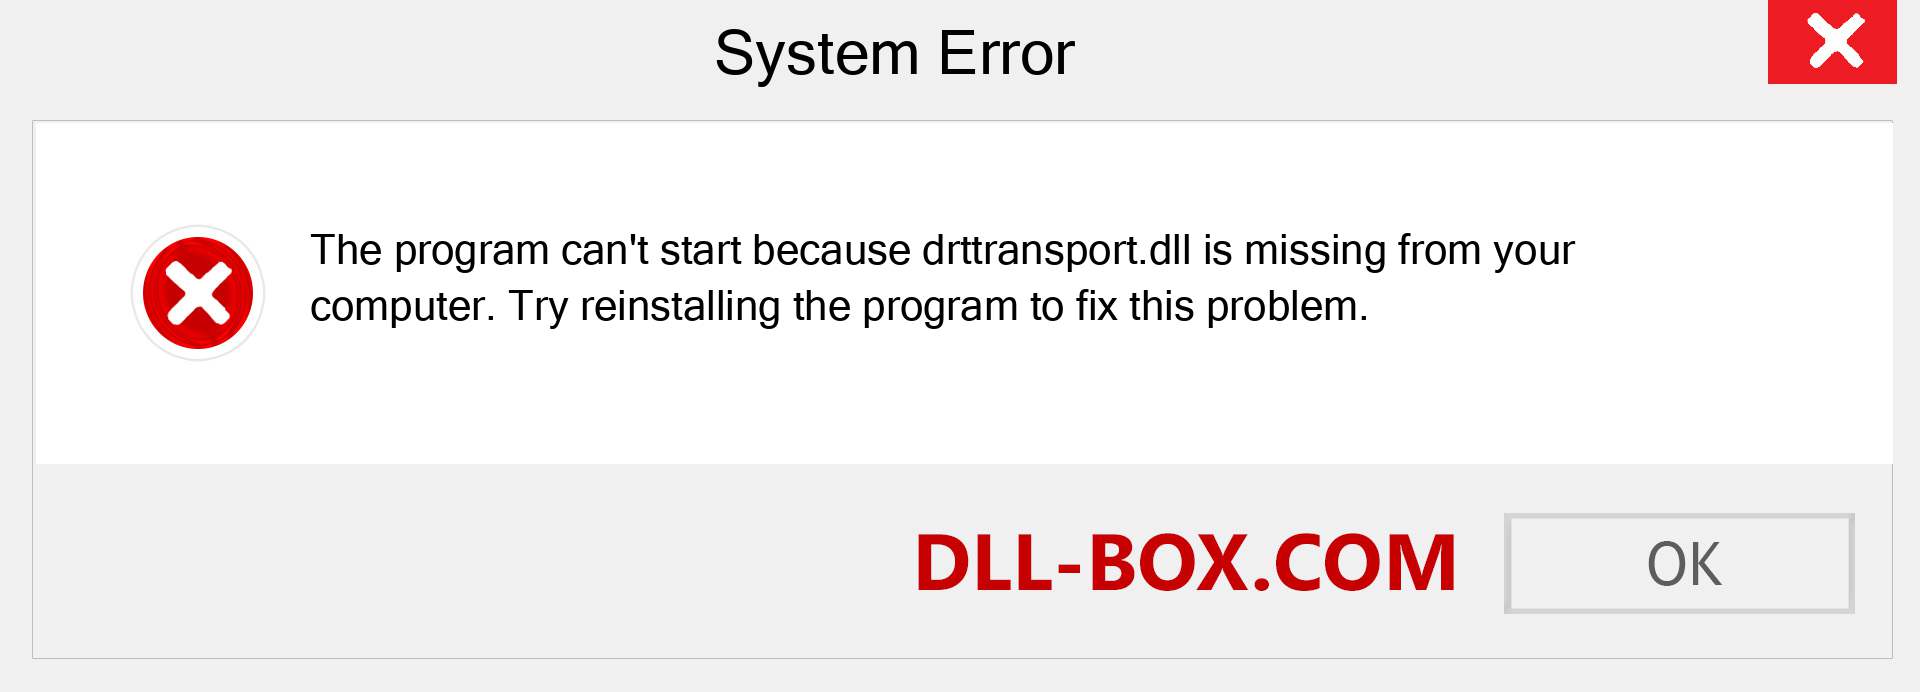  drttransport.dll file is missing?. Download for Windows 7, 8, 10 - Fix  drttransport dll Missing Error on Windows, photos, images